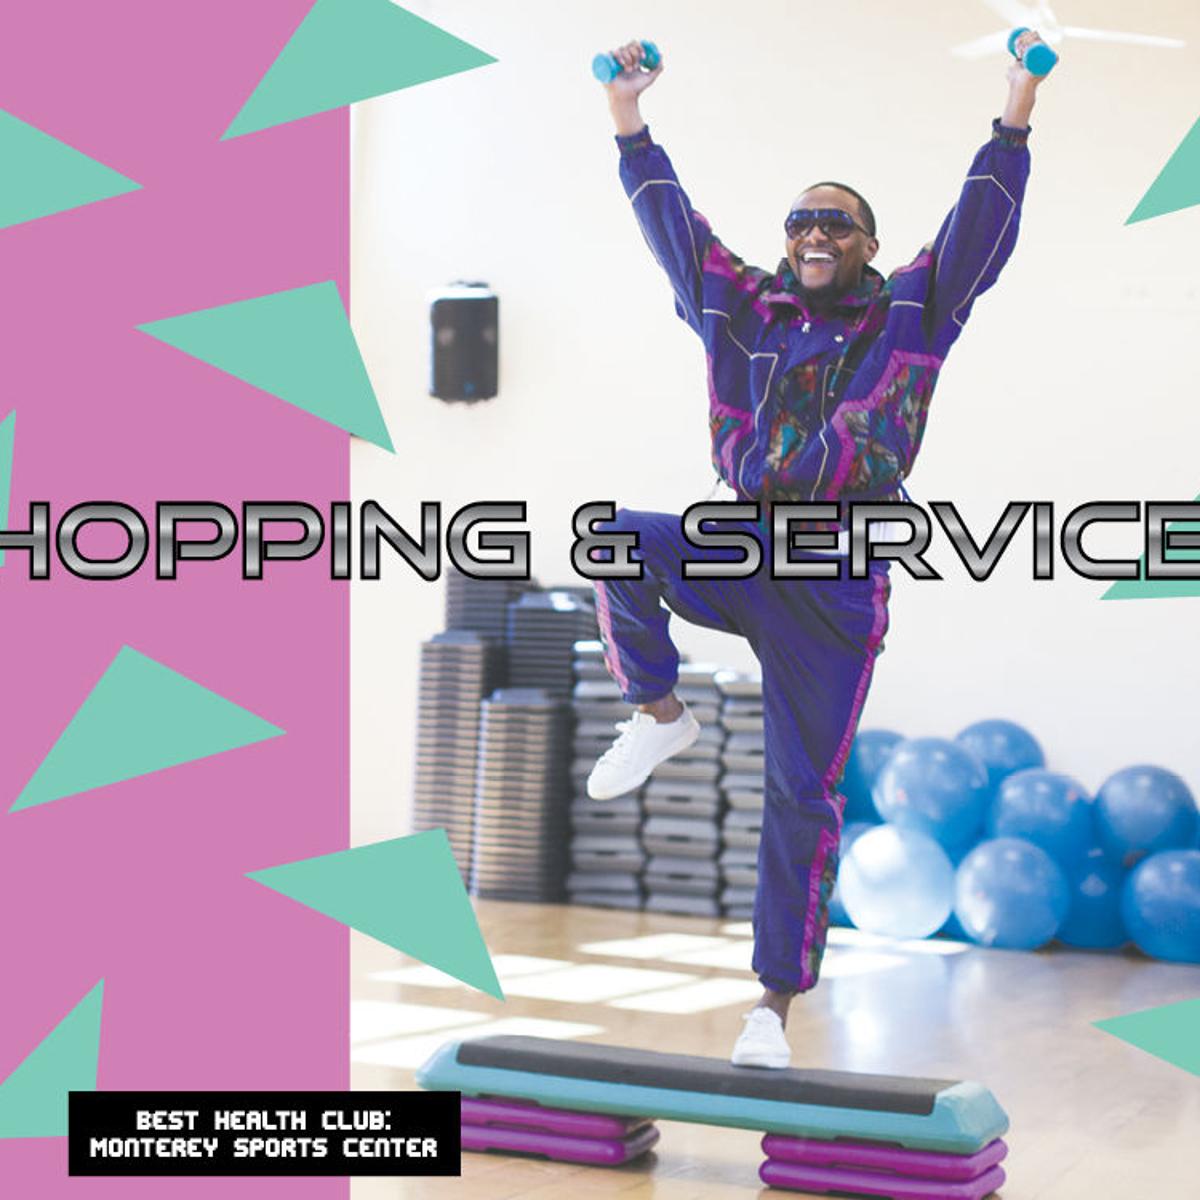 Best Of 2019 Shopping And Services Cover Collections